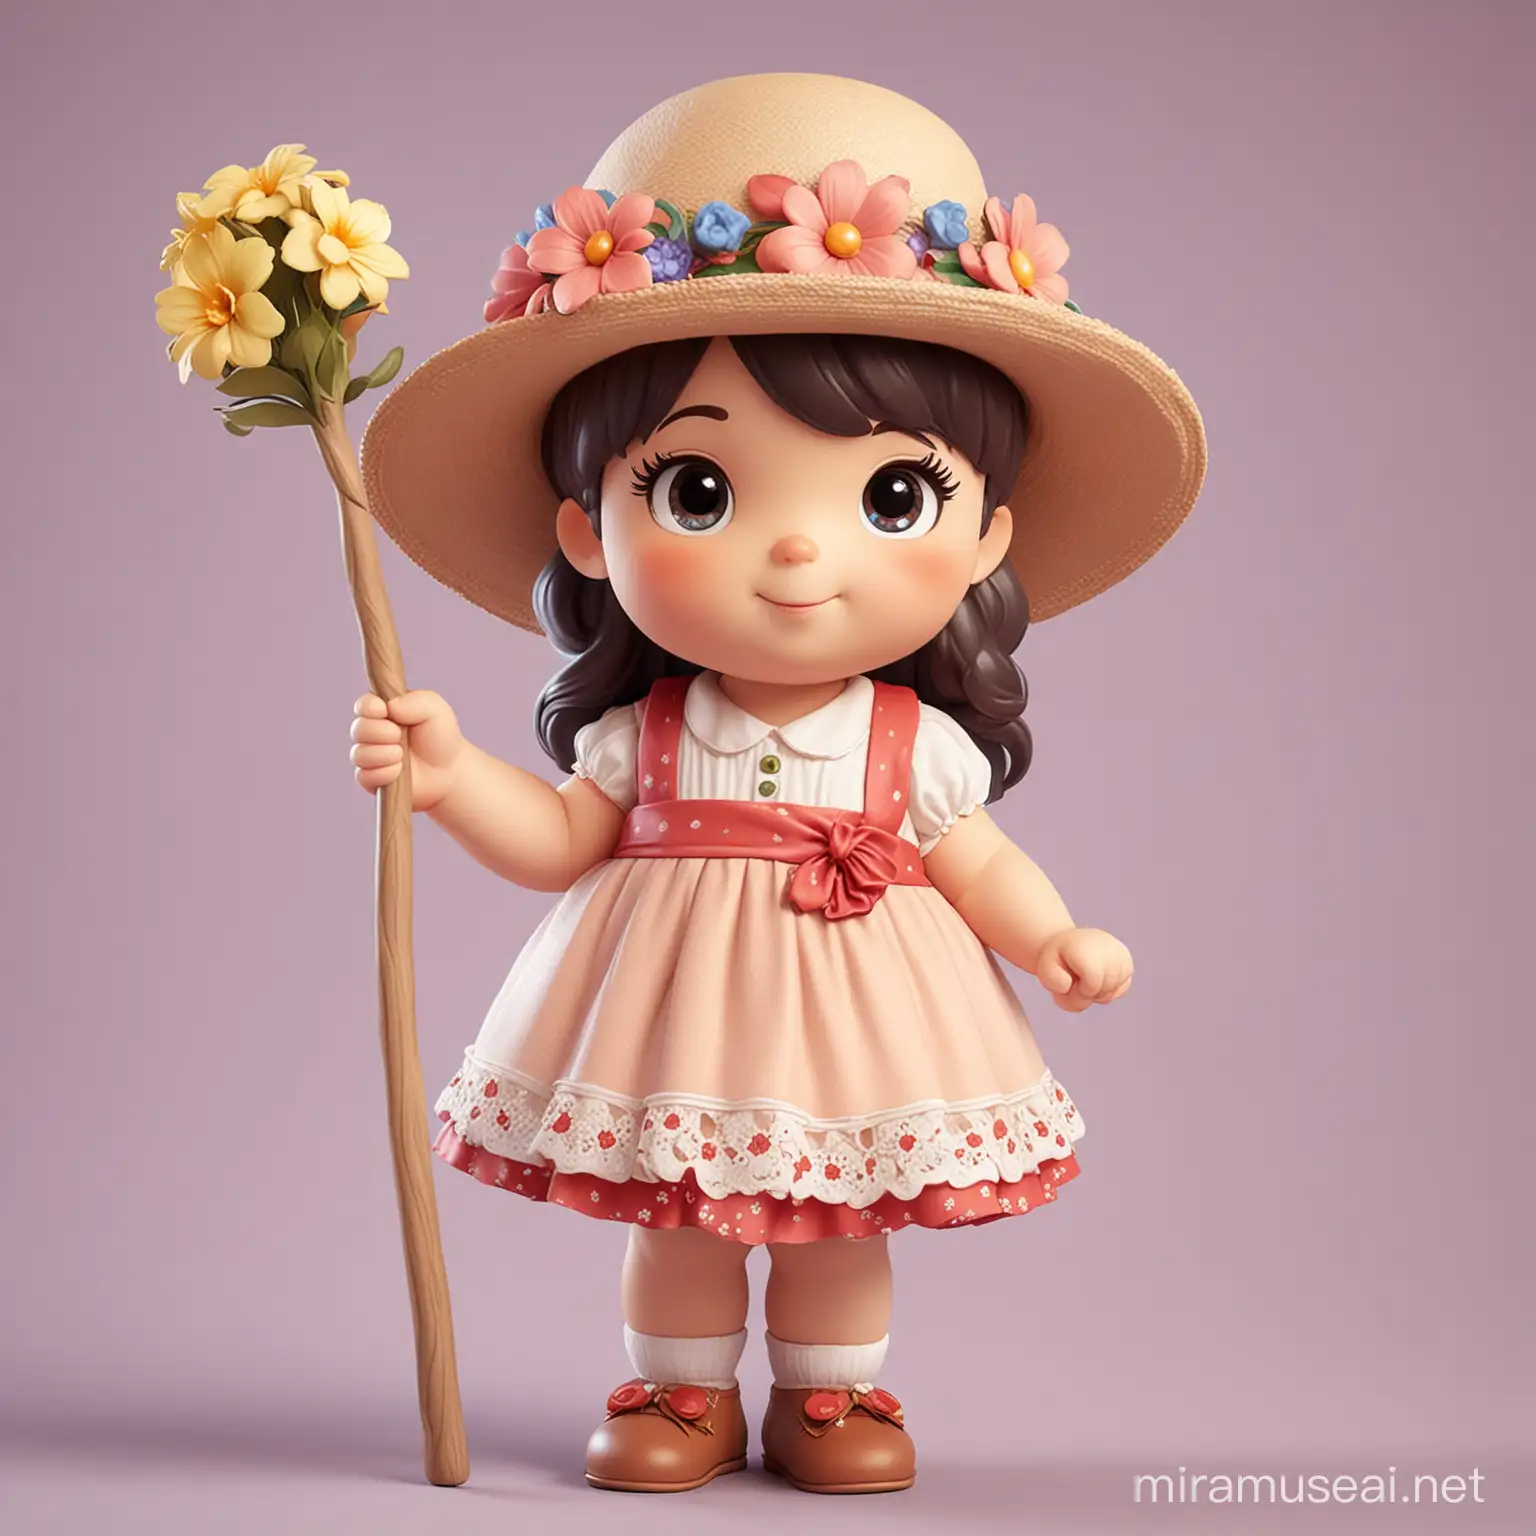 small chubby girl wearing frock and hat with a stick and flowers in hand mascot